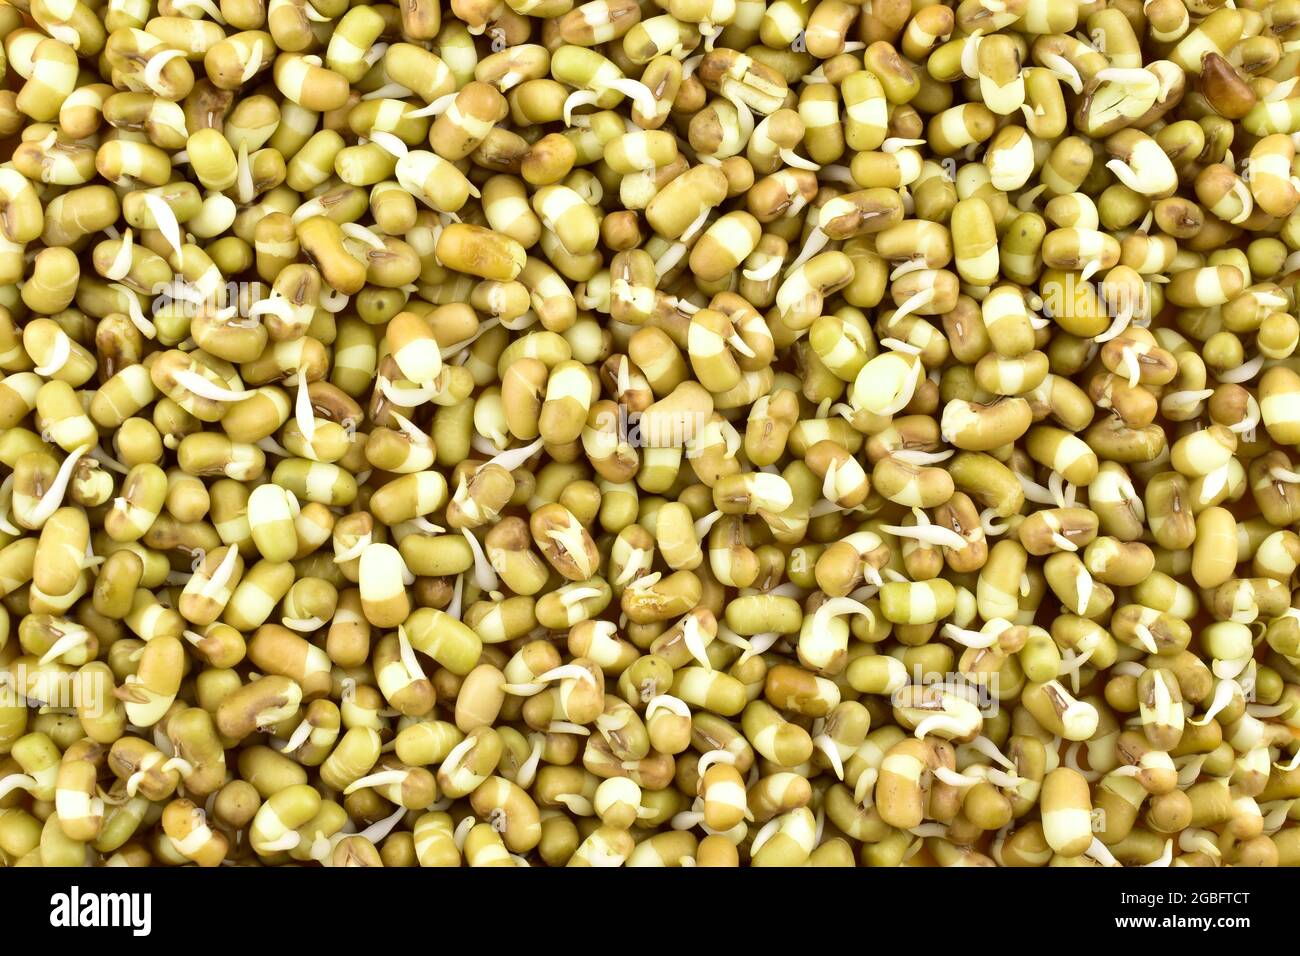 Top View Of Mung Bean Sprouts, Sprouted Mung Bean Texture Stock Photo